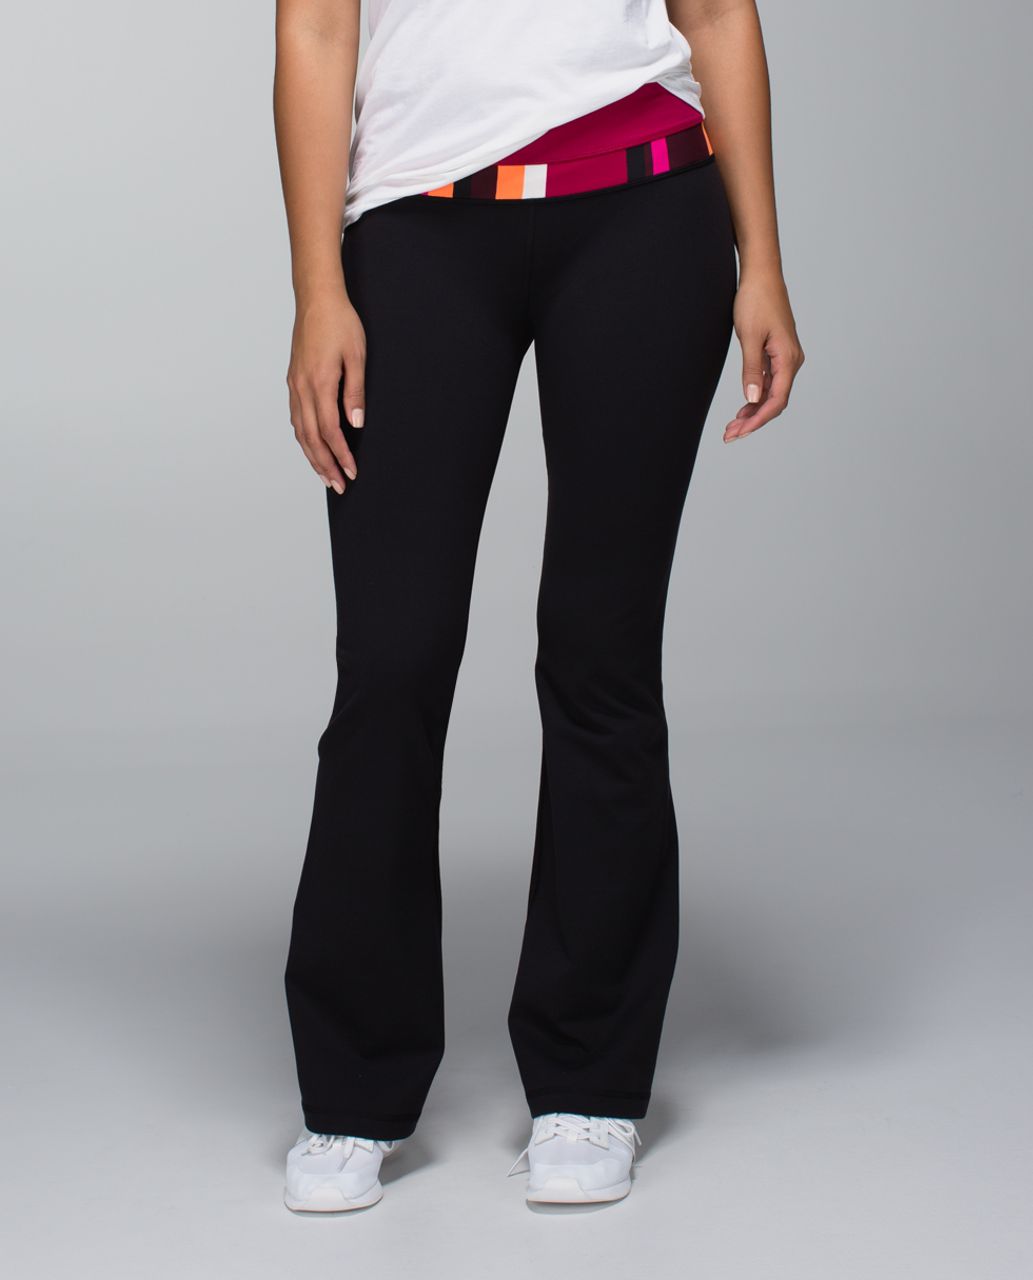 Lululemon Groove Pant *Full-On Luon (Regular) - Black / Bumble Berry / Blossom Stripe Bumble Berry Ghost